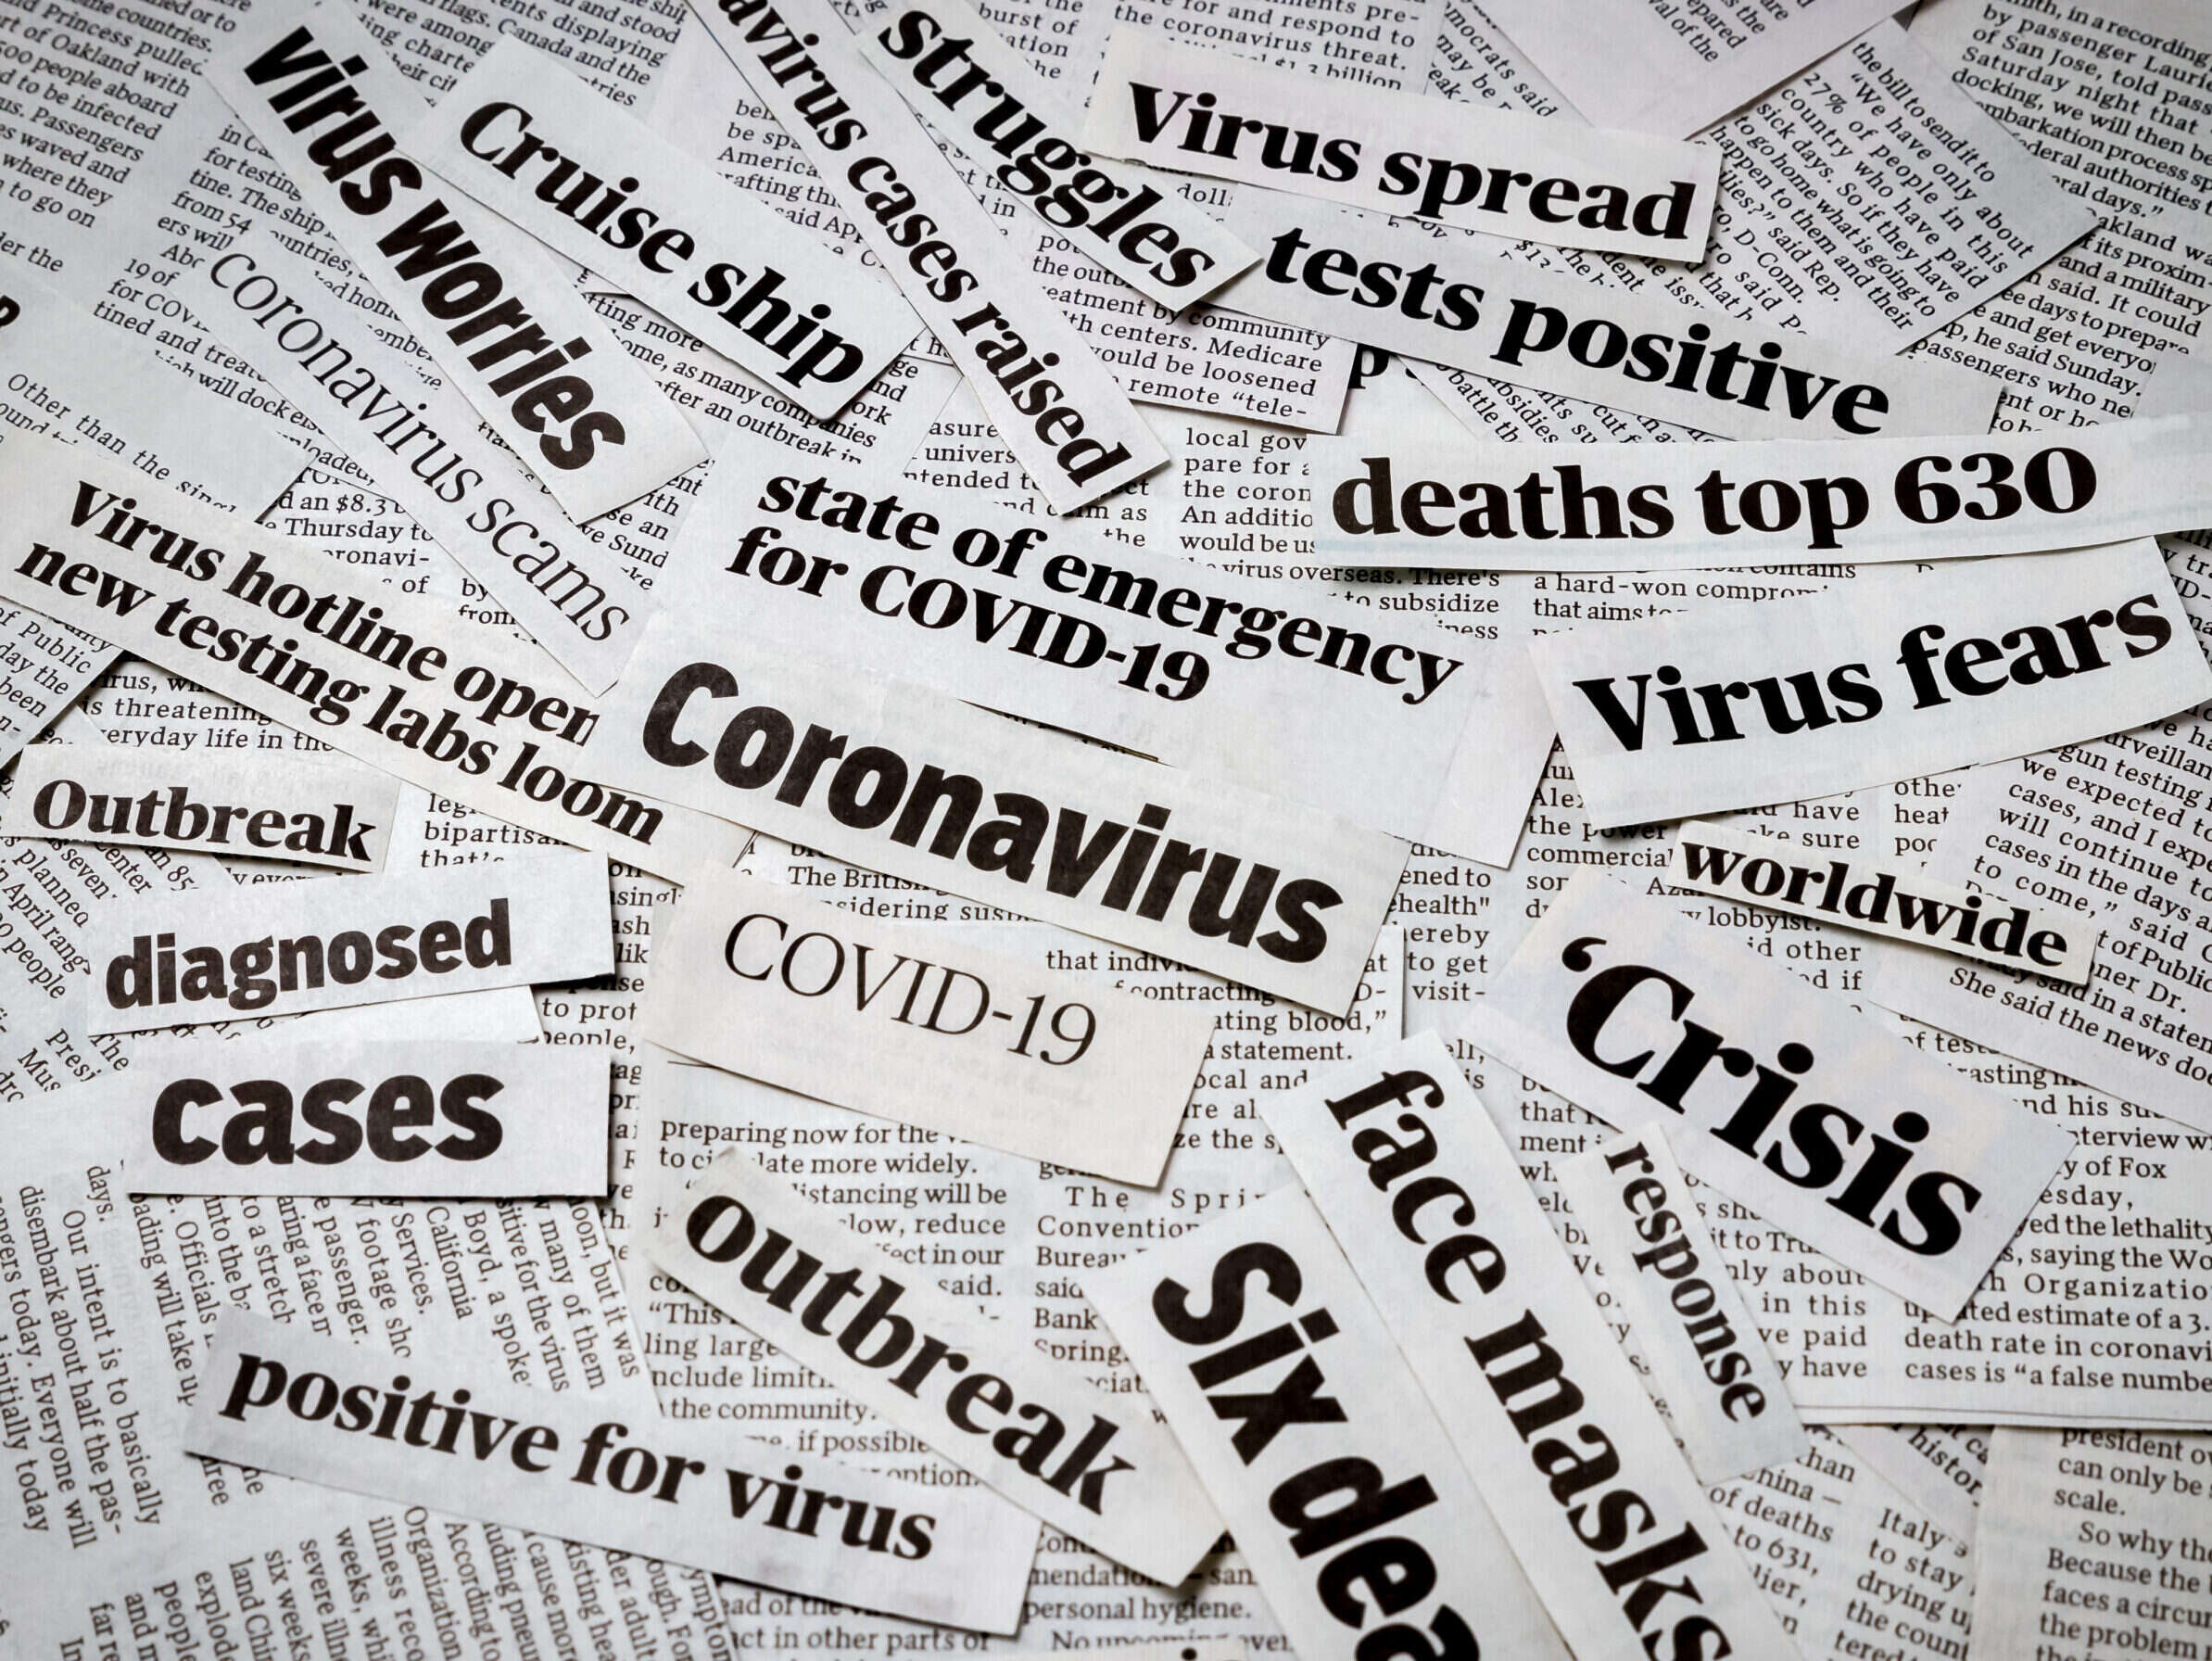 Two-thirds of Brits say Covid-19 pandemic has made them appreciate journalism more